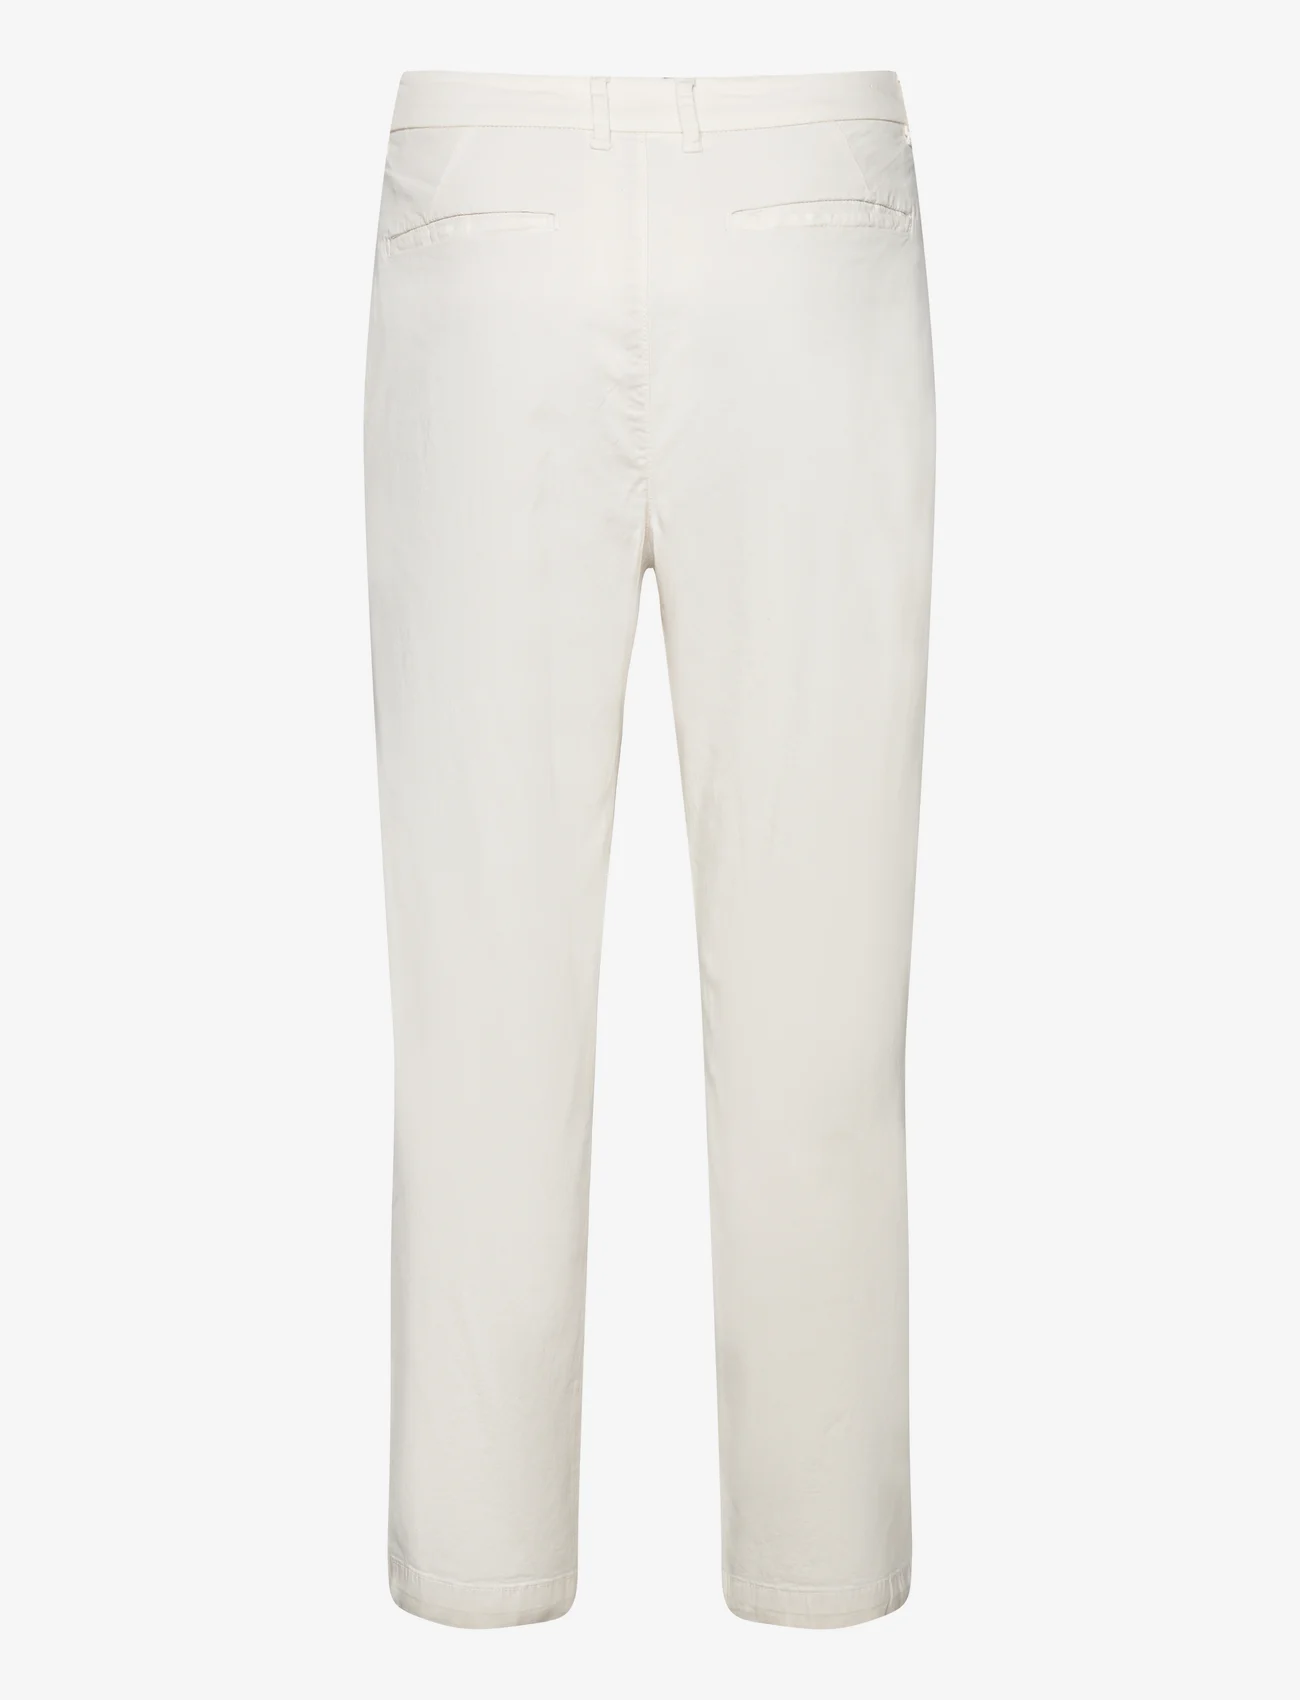 Lindbergh - Wide fit pants - chinos - off white - 1